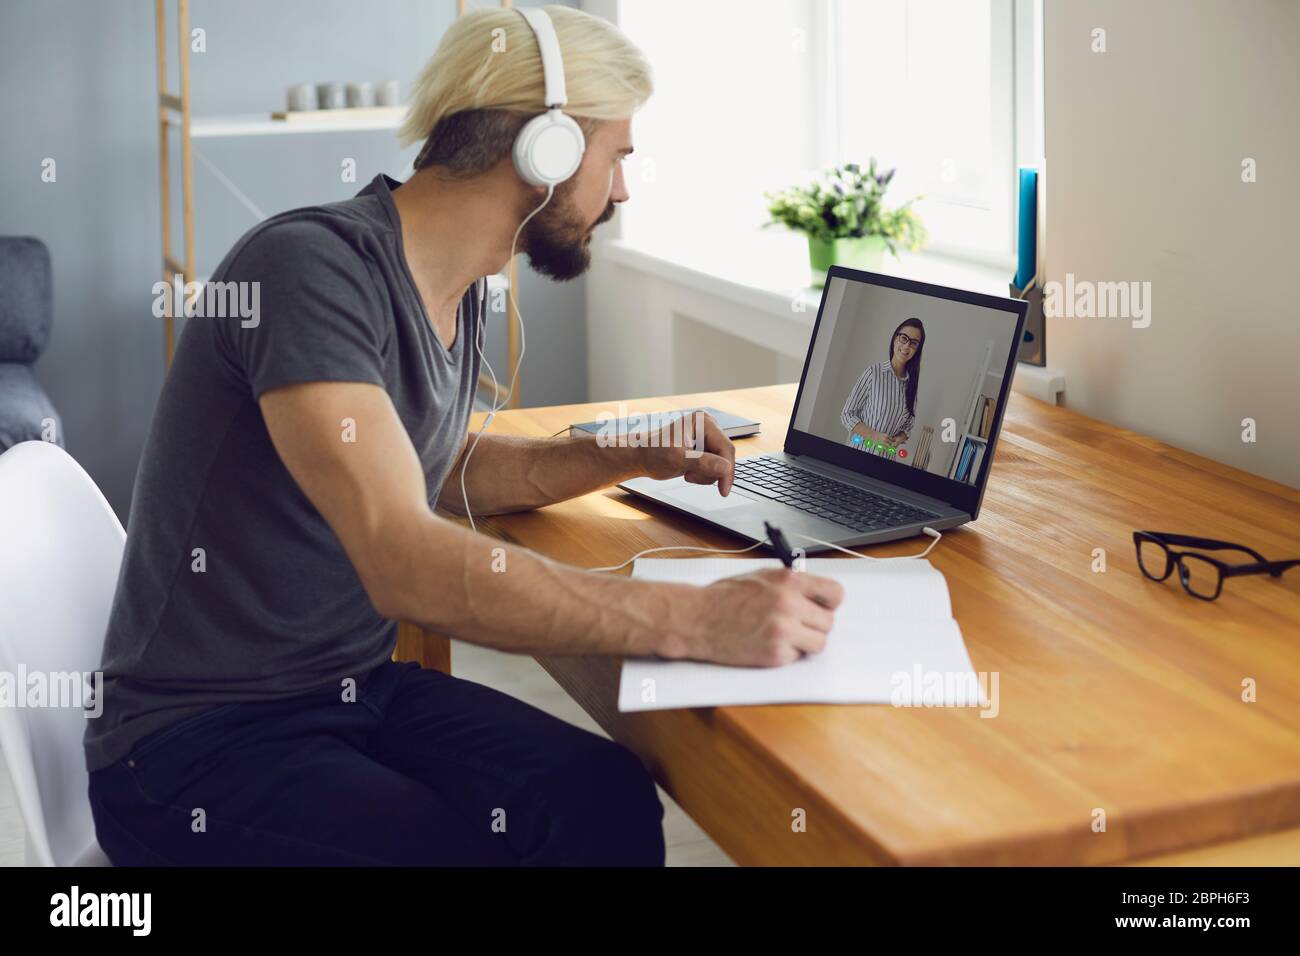 University College Online Education A Guy Student In Headphones